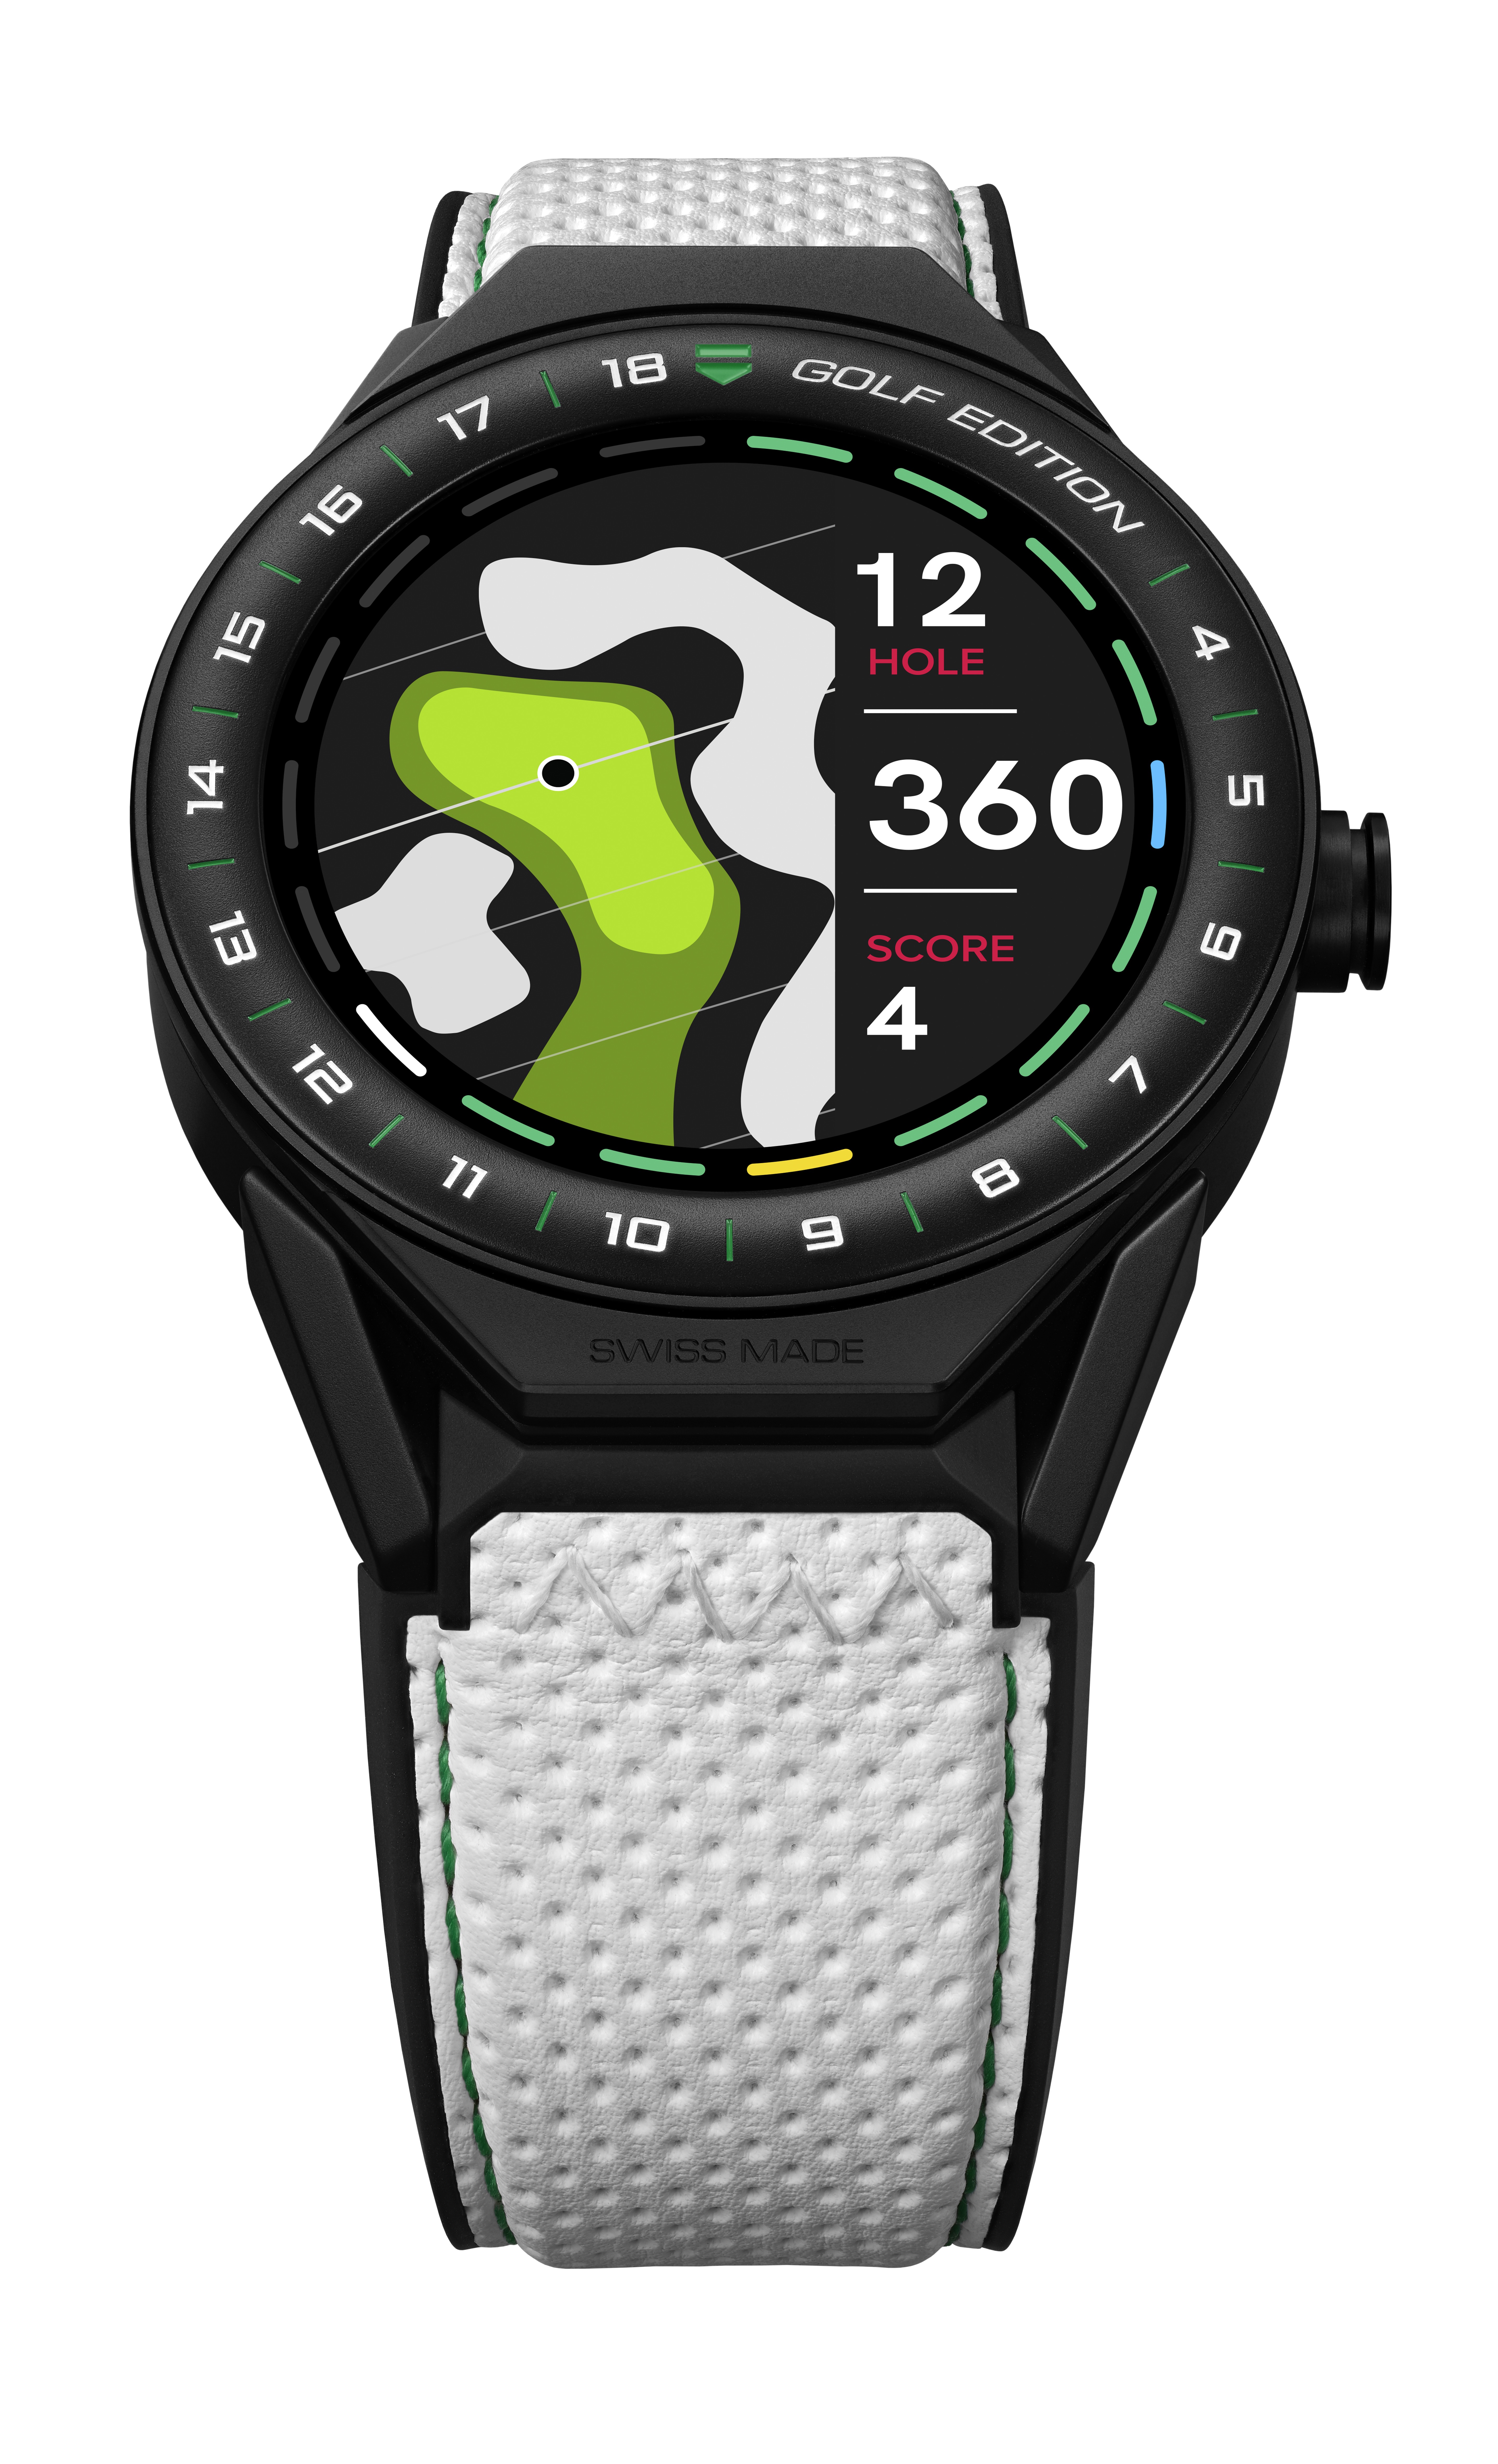 The Tag Heuer Connected Modular 45 “Golf Edition ”.